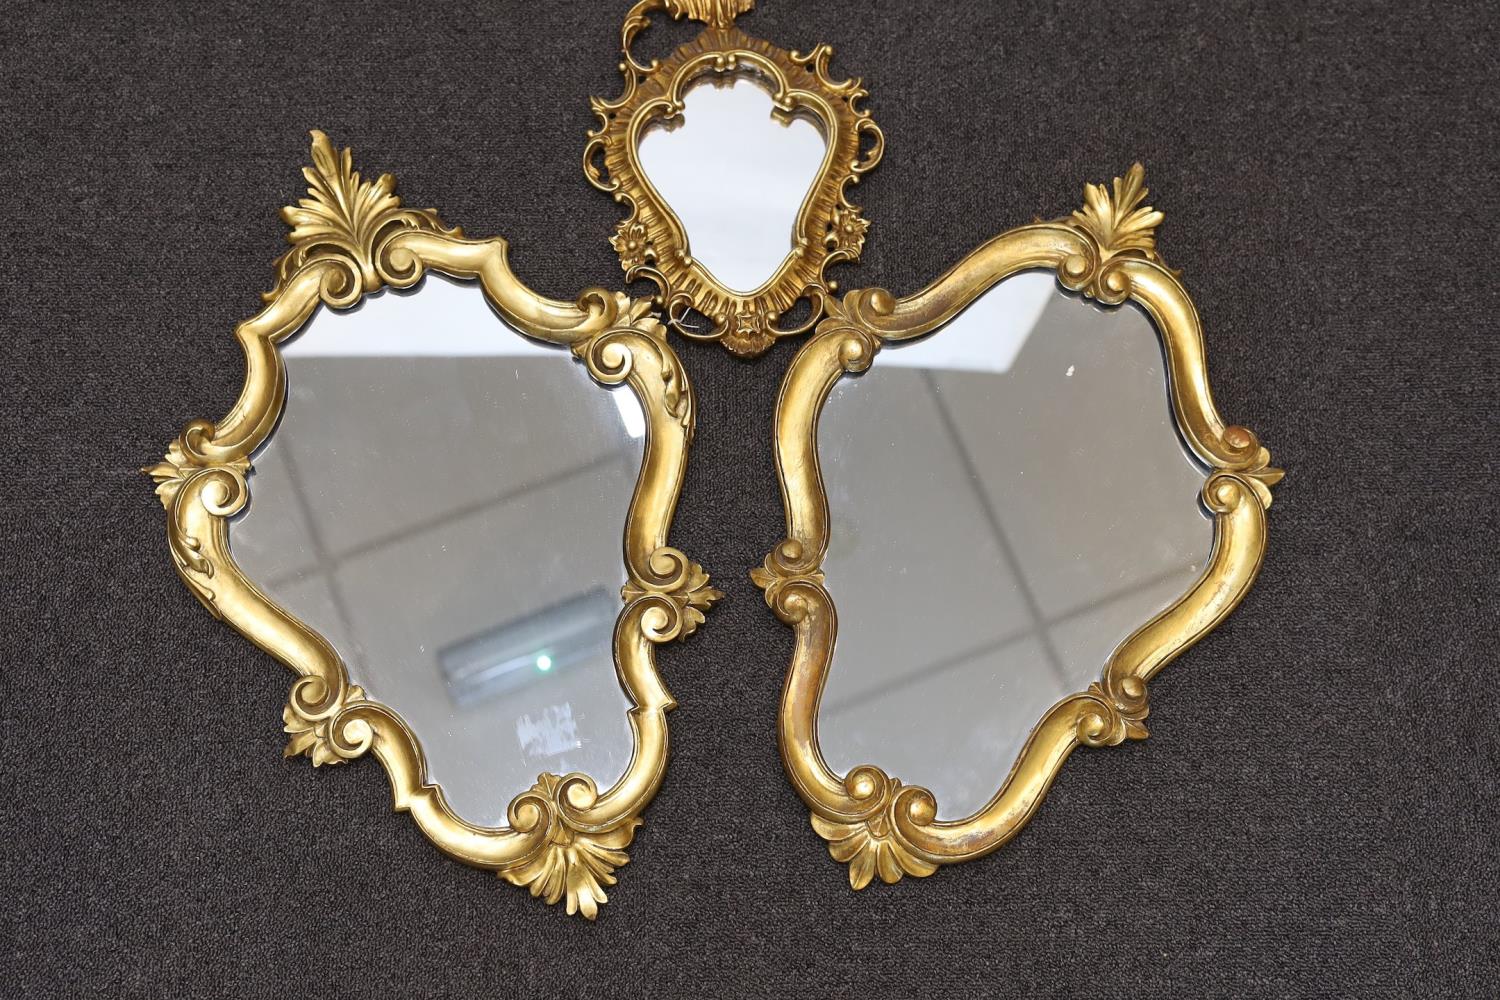 A pair of George III style giltwood cartouche wall mirrors, height 60cm, together with two similar - Image 4 of 7